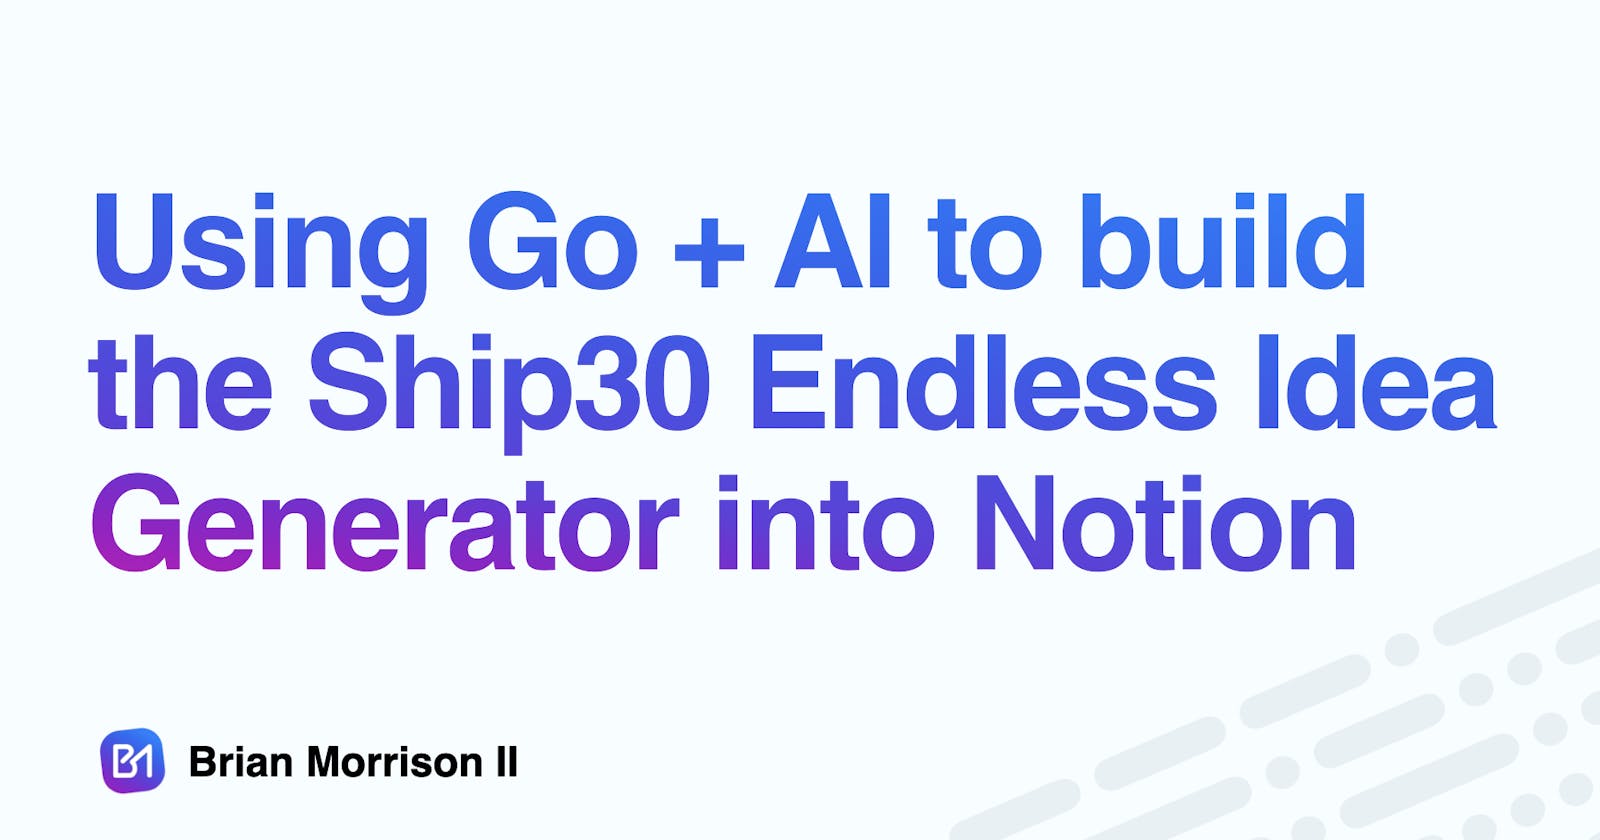 The power of automation: How I built the Ship30 Endless Idea Generator into Notion using AI and Go to generate article ideas directly within Notion